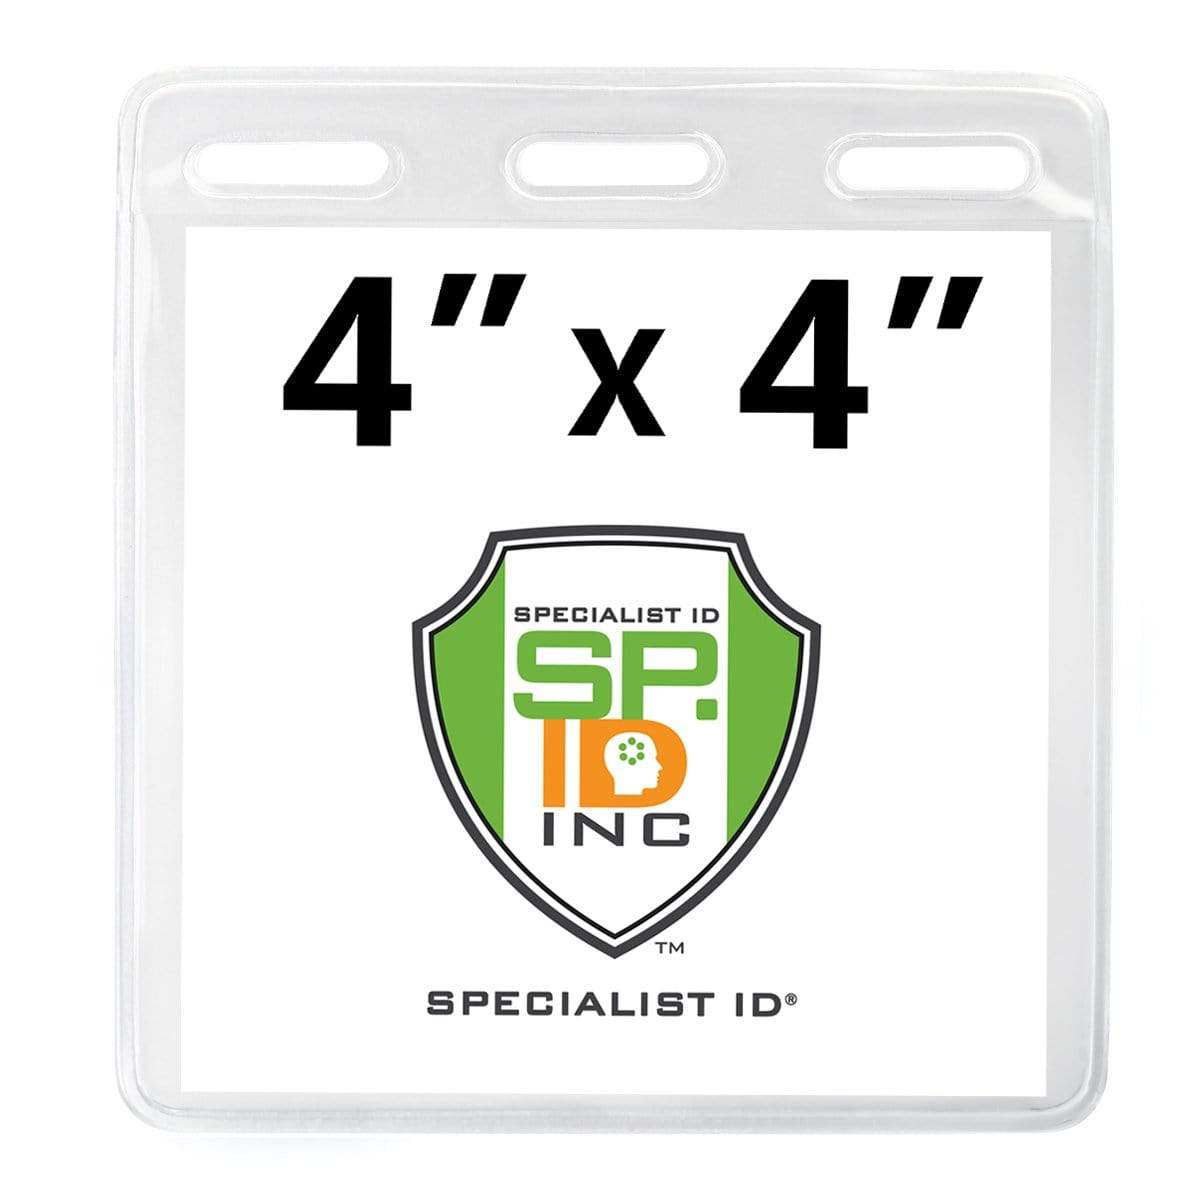 Clear 4 x 4 Vaccination Card Holders - For Oversized or Laminated Immunization Card Holders -  Large Vinyl Event Badge Holder (1840-1612) 1840-1612